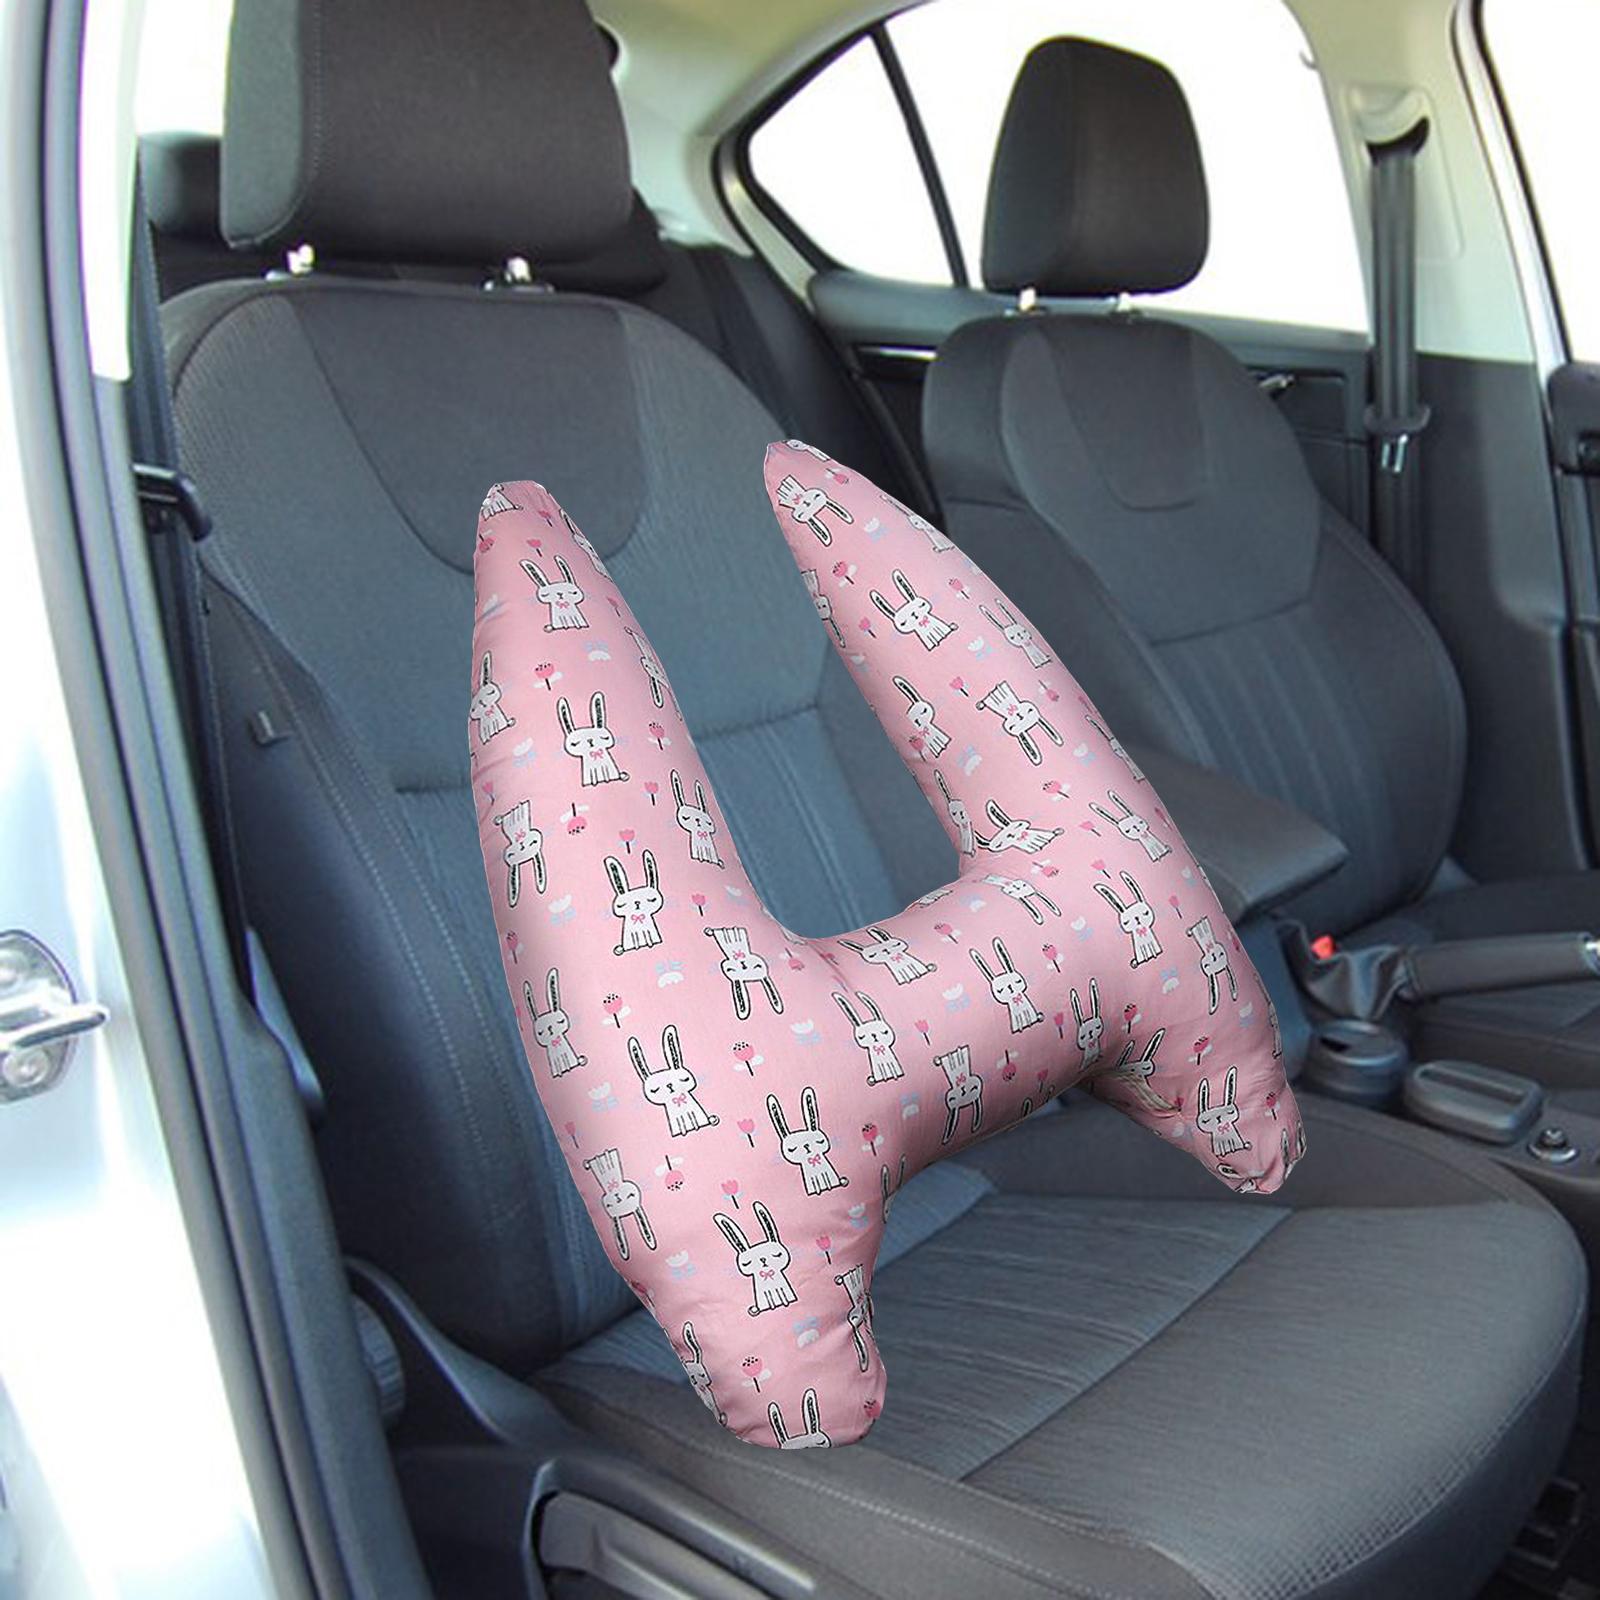 Car Back Seat Travel Pillow Provides Head and Body Support Sleeping Pillow Pink Rabbit